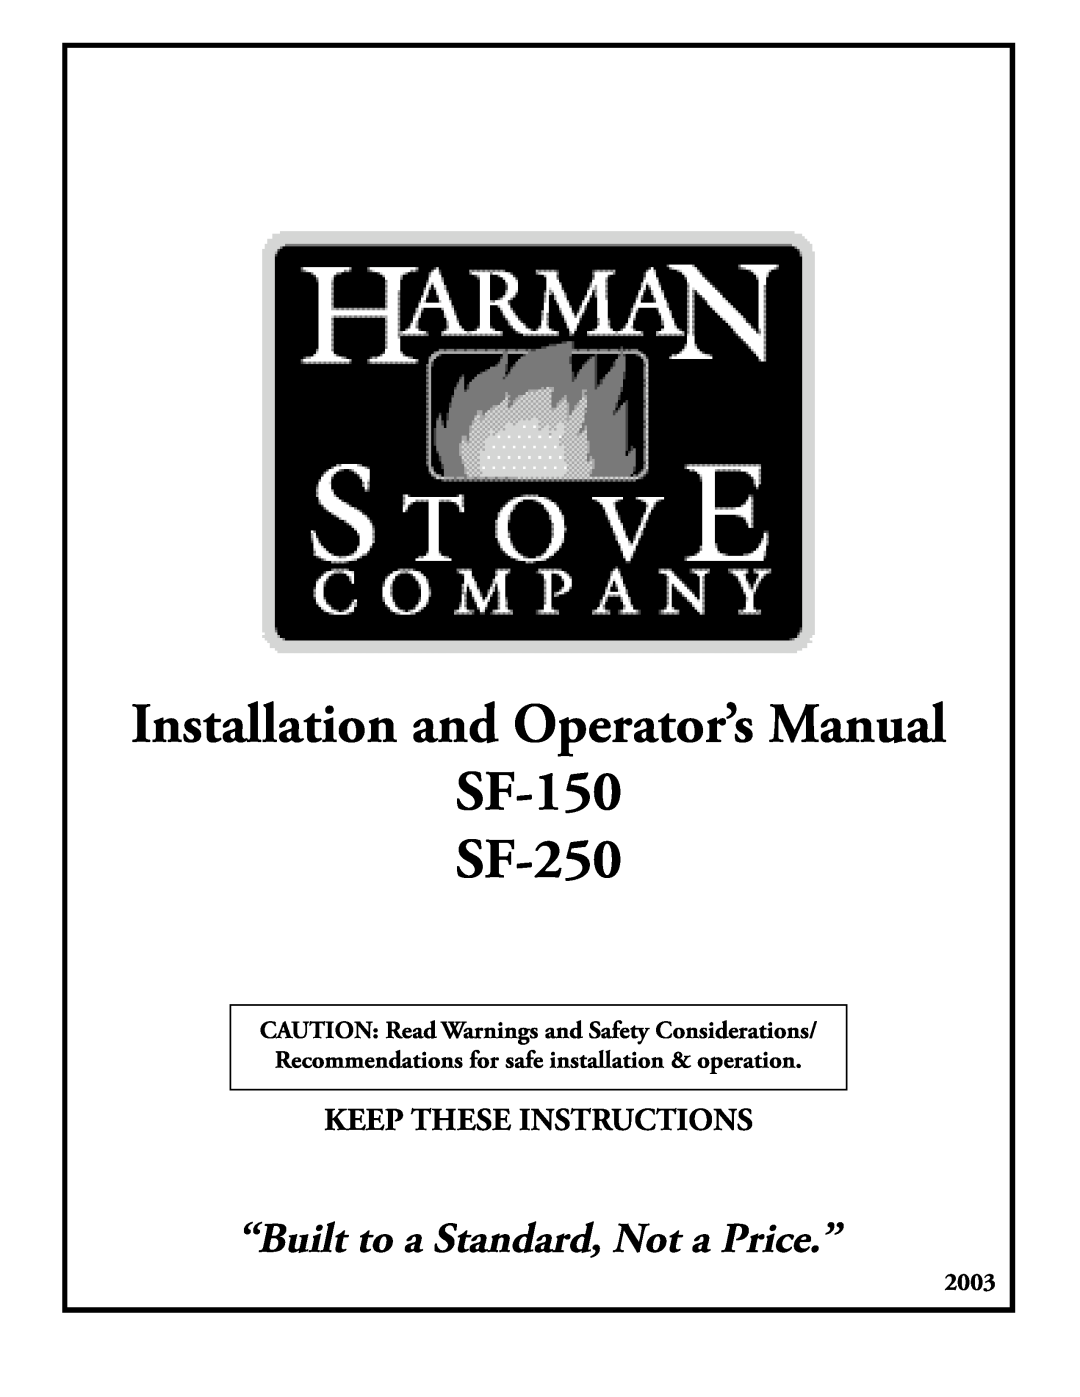 Harman Stove Company SF-150 SF-250 manual Keep These Instructions, CAUTION Read Warnings and Safety Considerations, 2003 